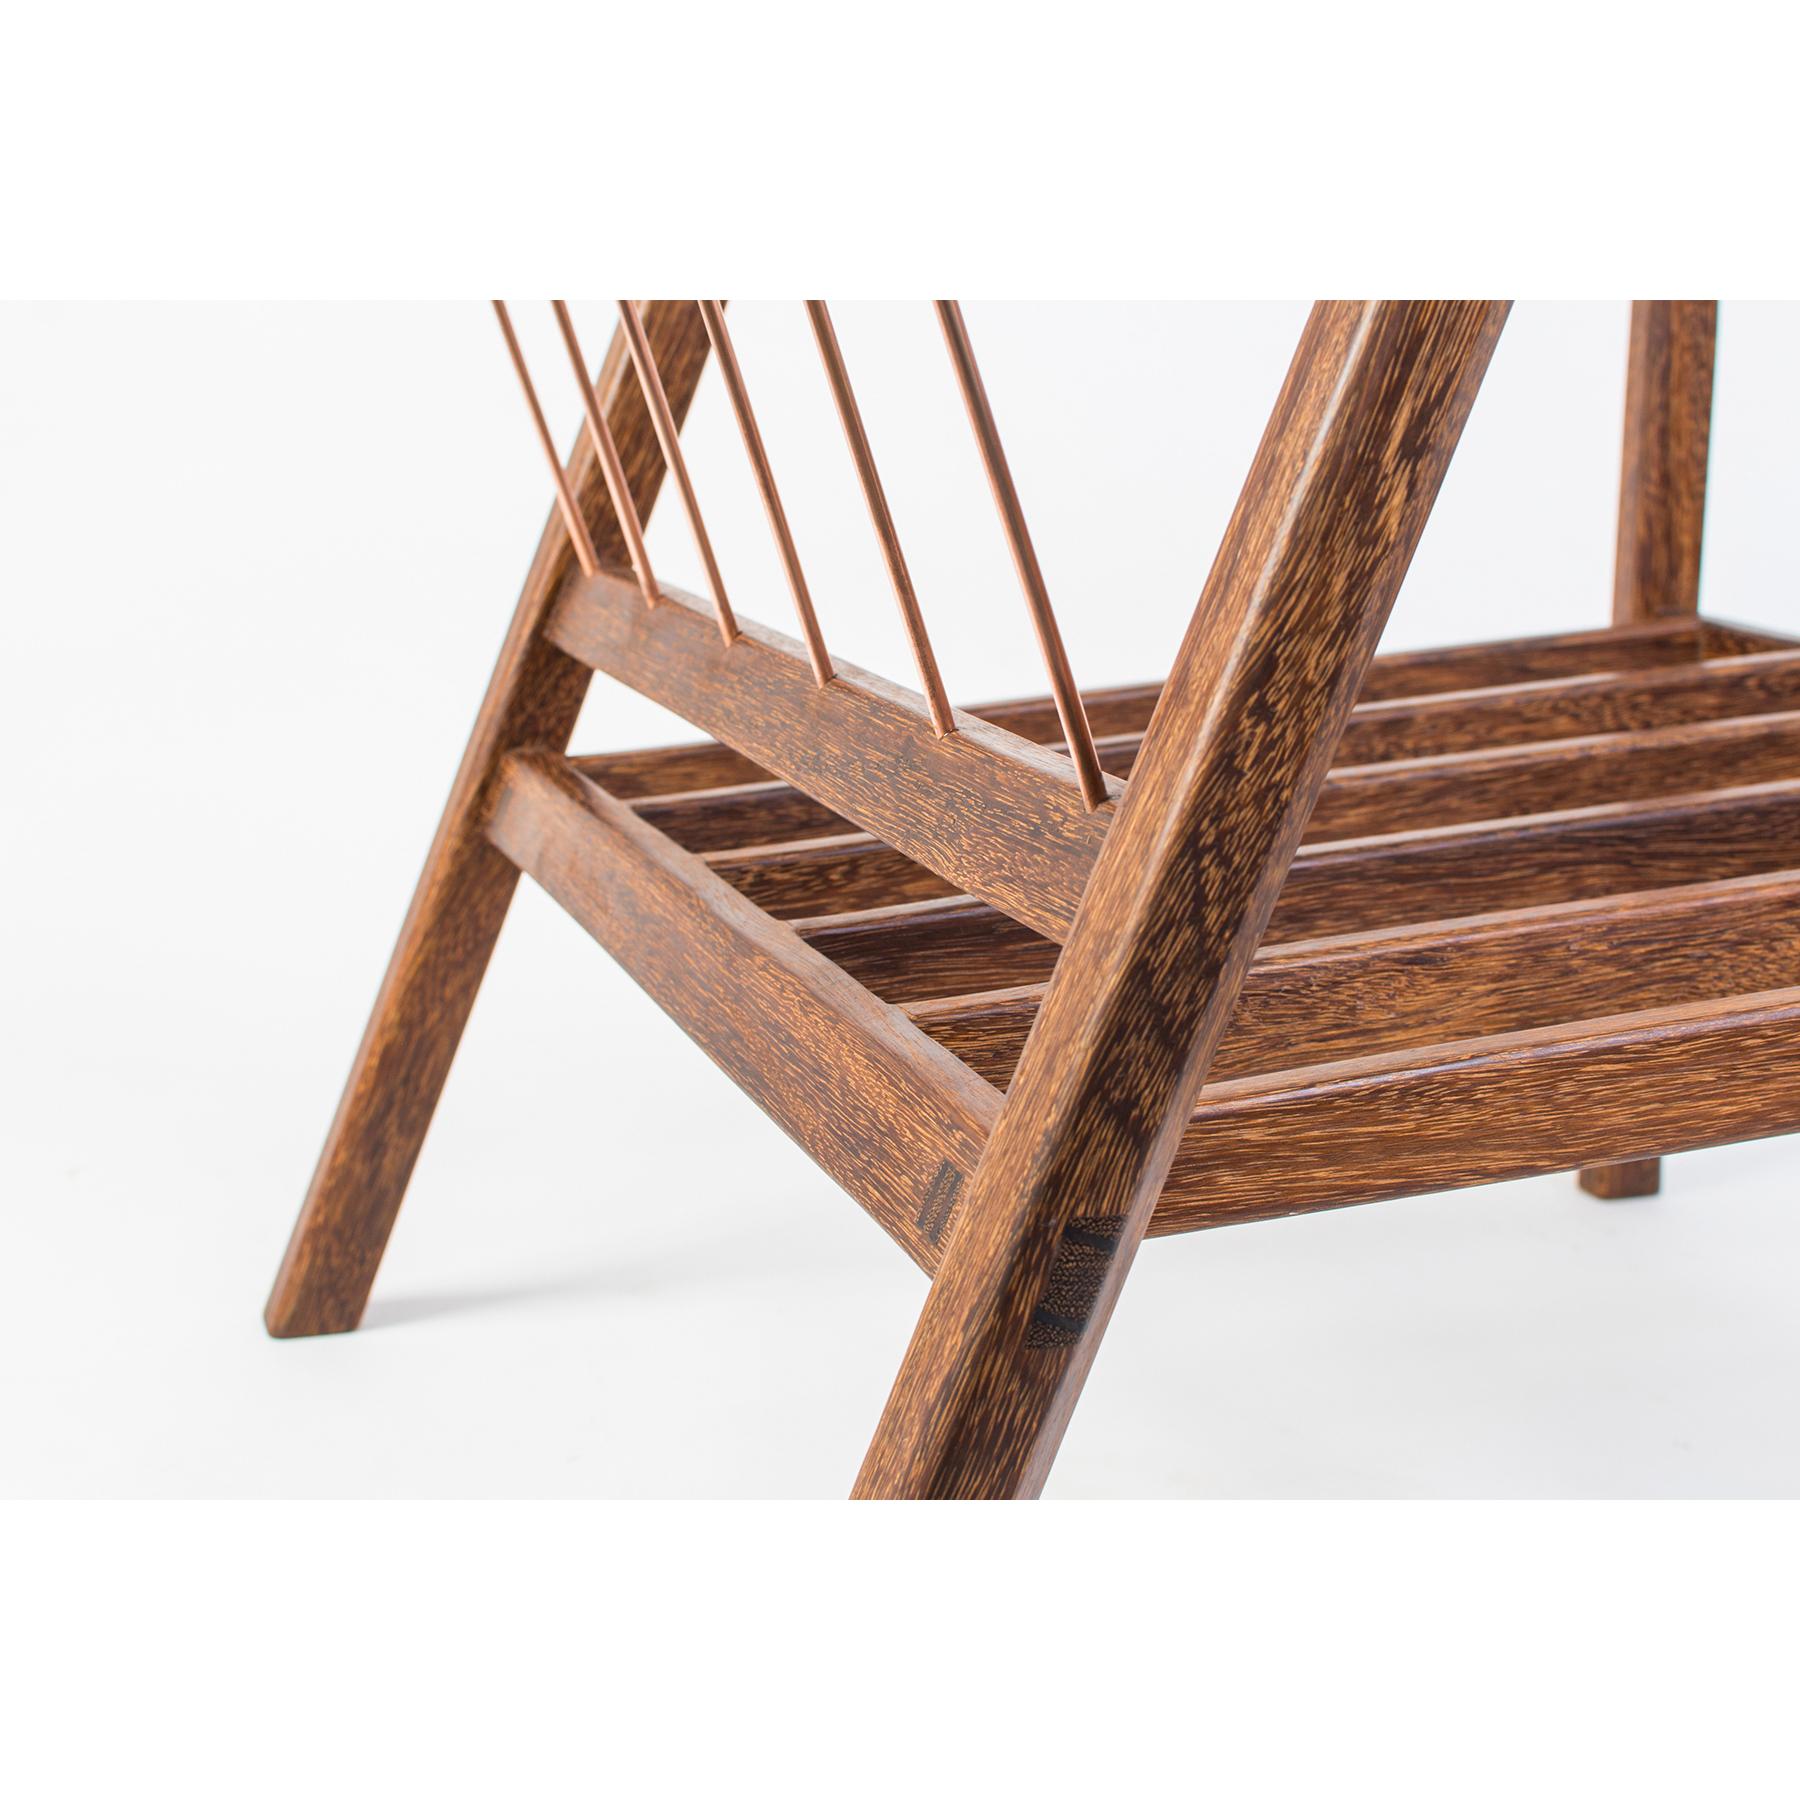 Canela Contemporary Armchair in Brazilian Hardwood by Knót Artesanal In Excellent Condition For Sale In Paraty, Rio de Janeiro